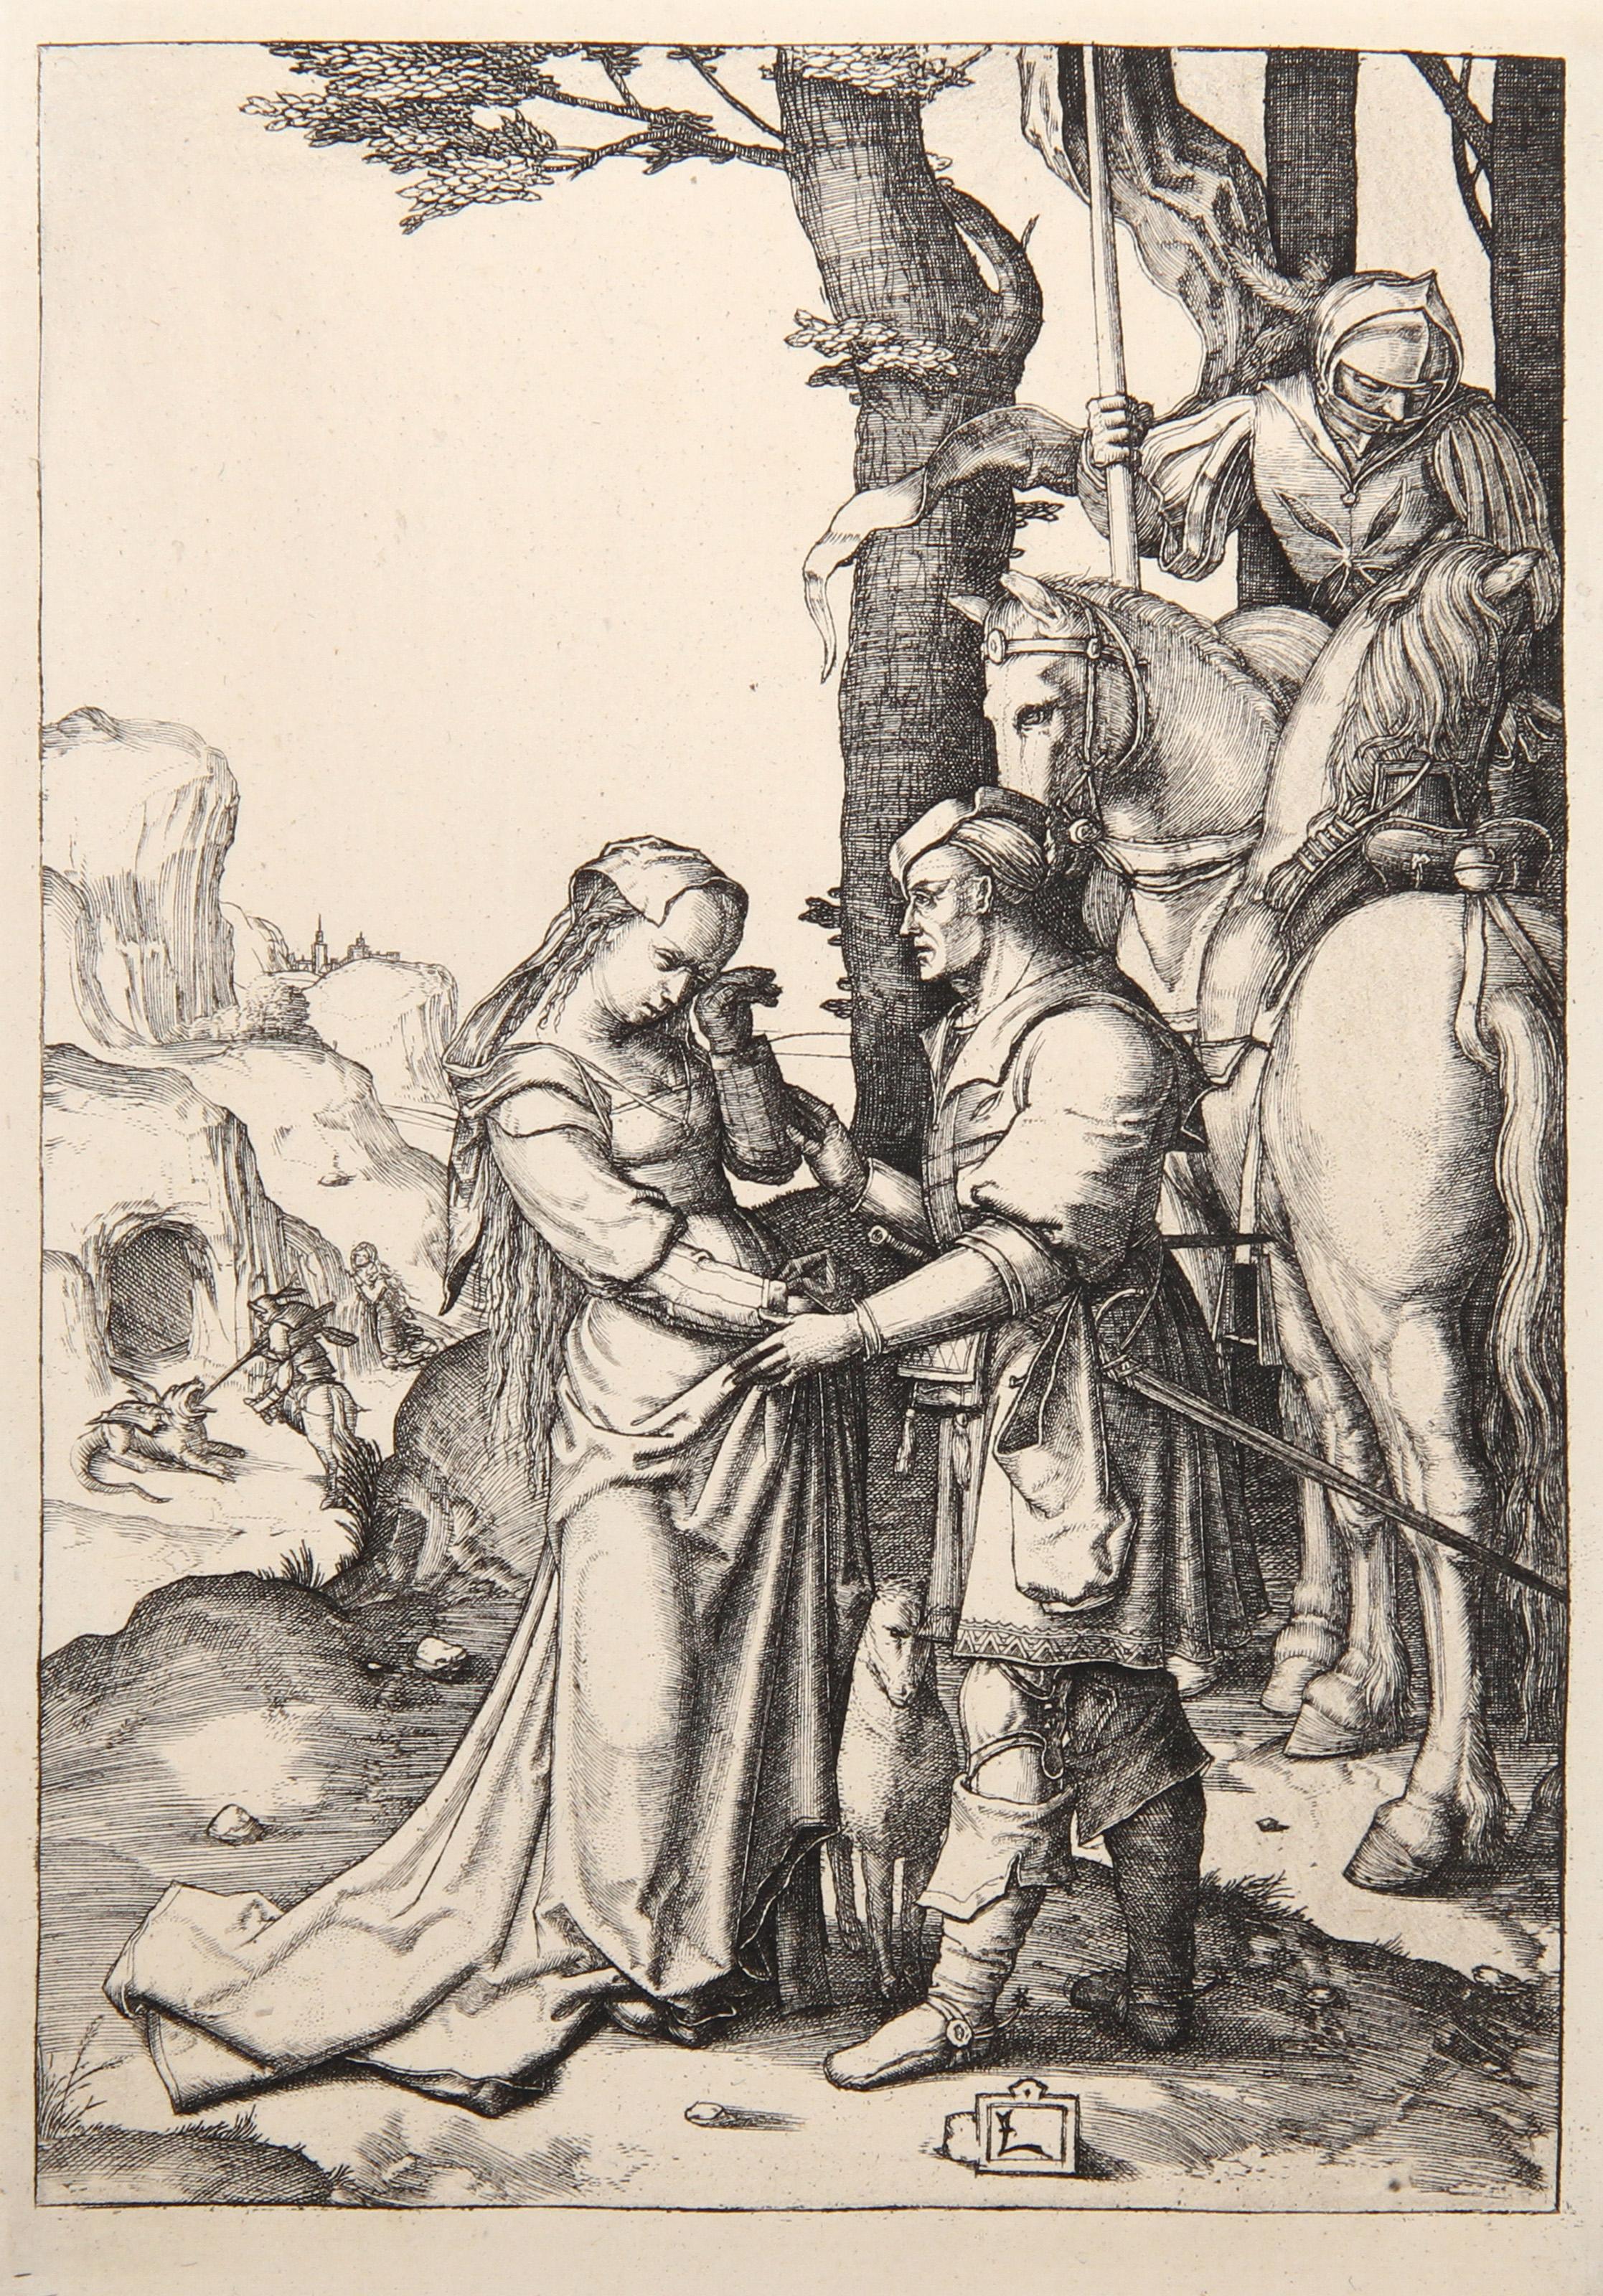 Artist: Lucas van Leyden, After by Amand Durand, Dutch (1494 - 1533) - Saint Georges, Year: 1873, Medium: Heliogravure, Size: 7  x 5 in. (17.78  x 12.7 cm), Printer: Amand Durand, Description: French Engraver and painter Charles Amand Durand,